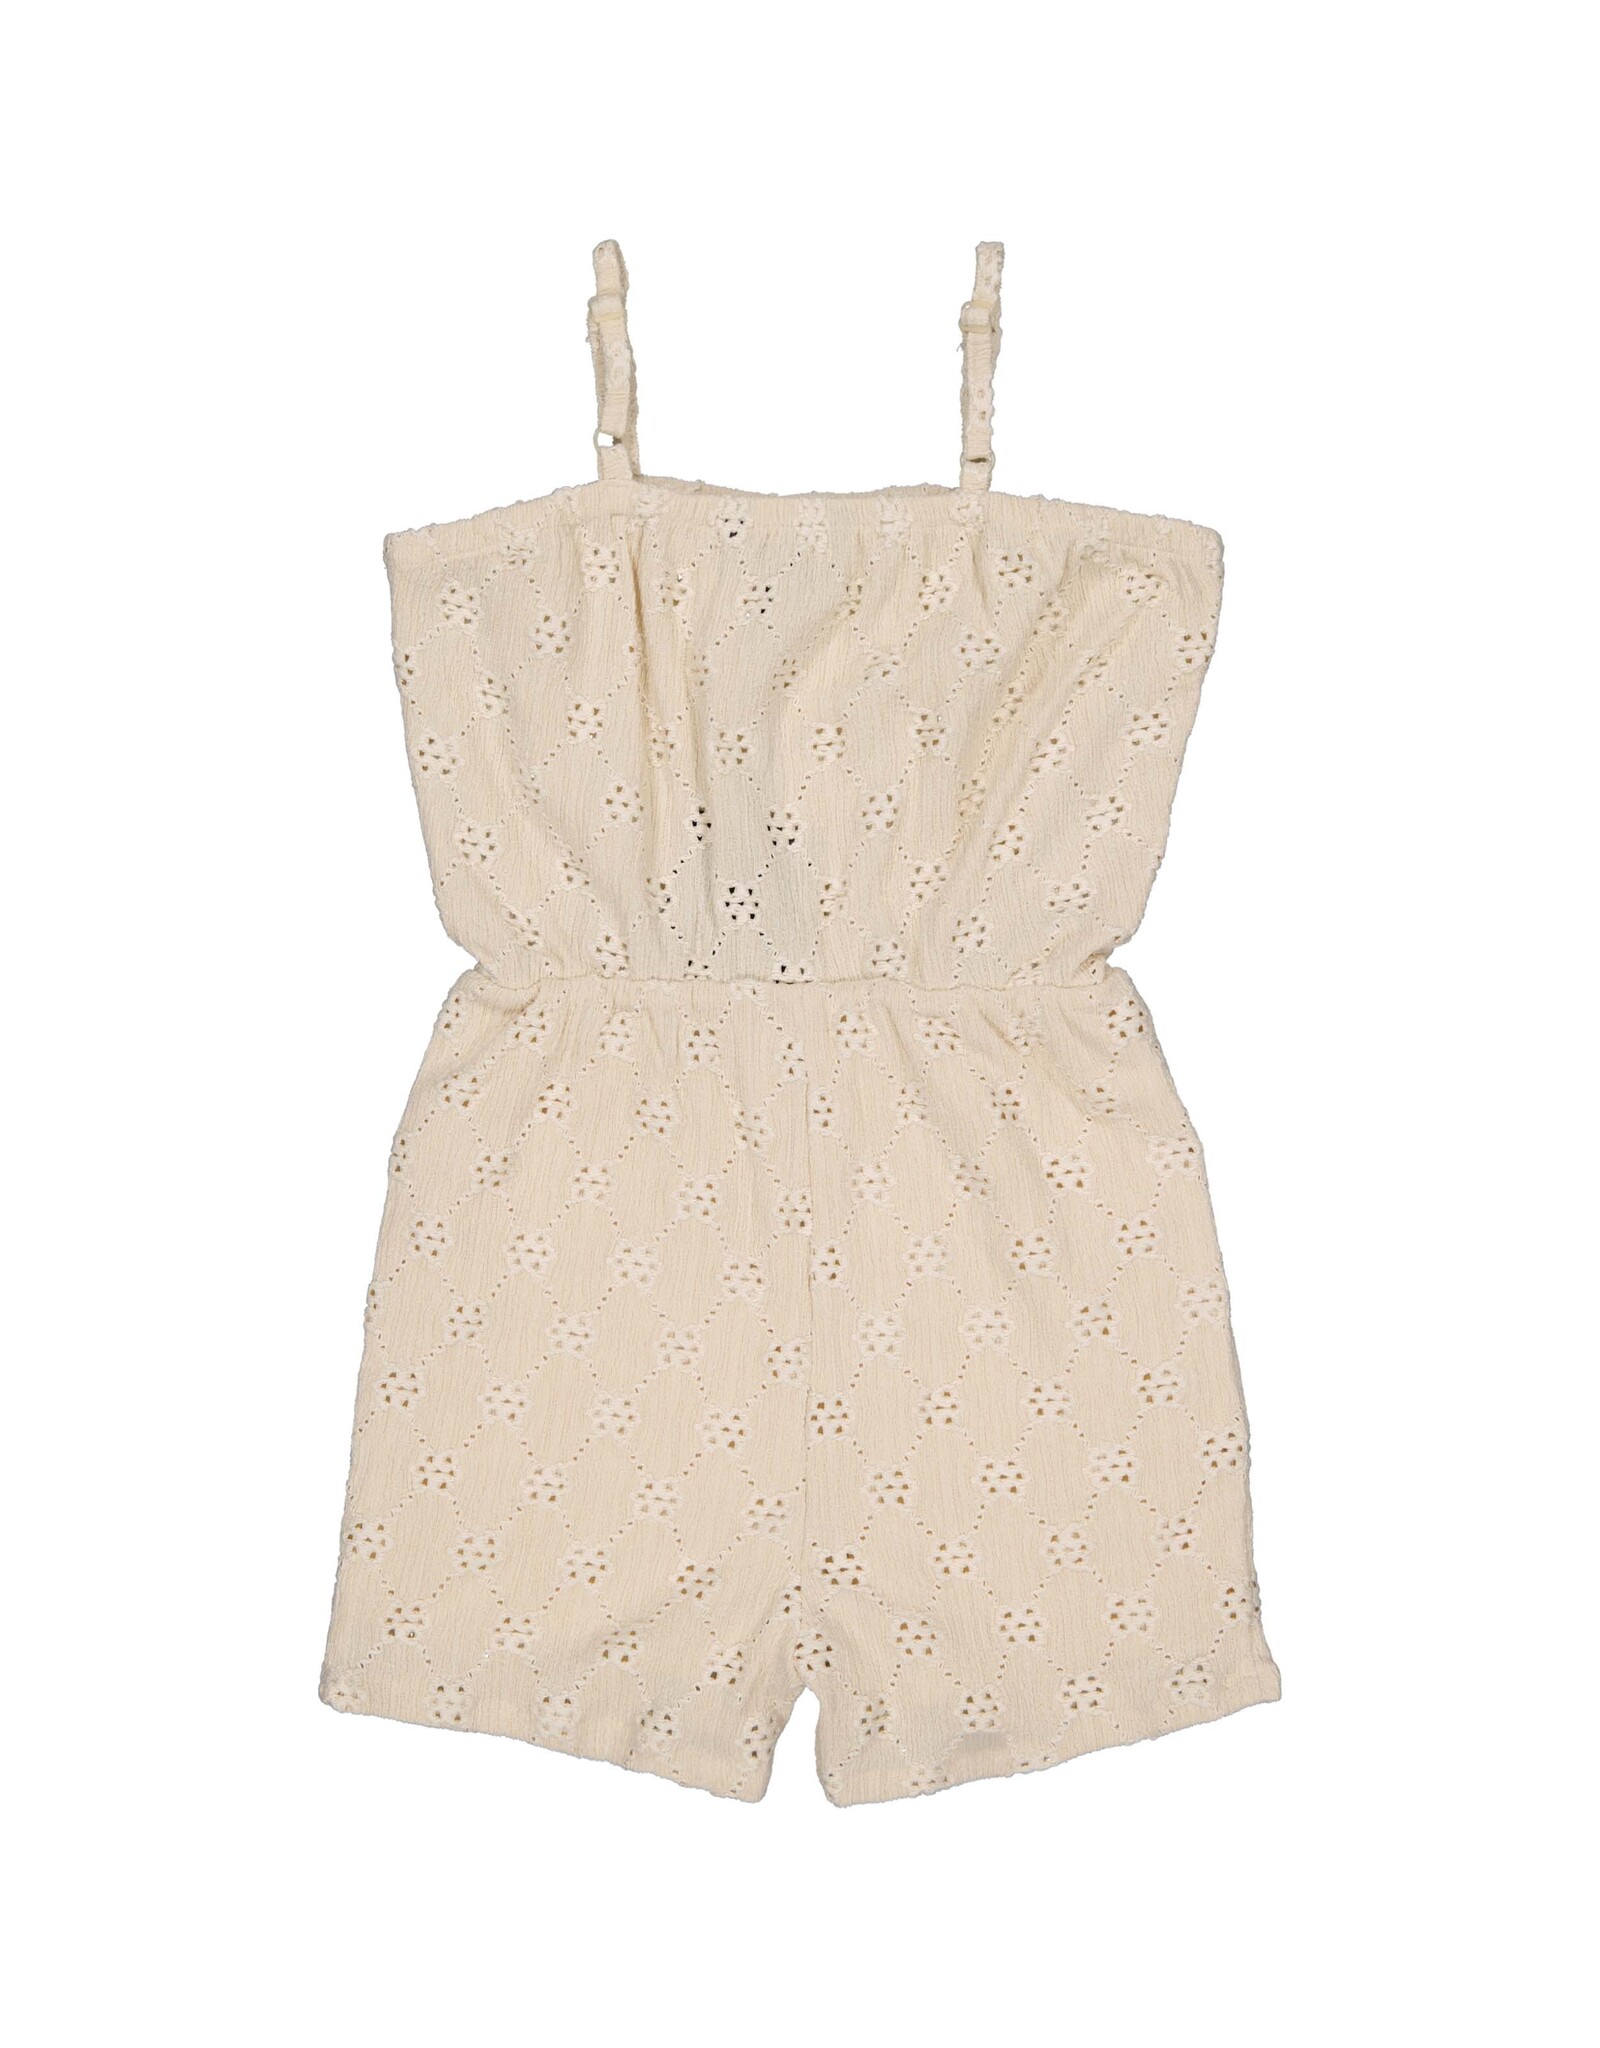 Levv Labels Little Girls Playsuit Ivory White MARALS243